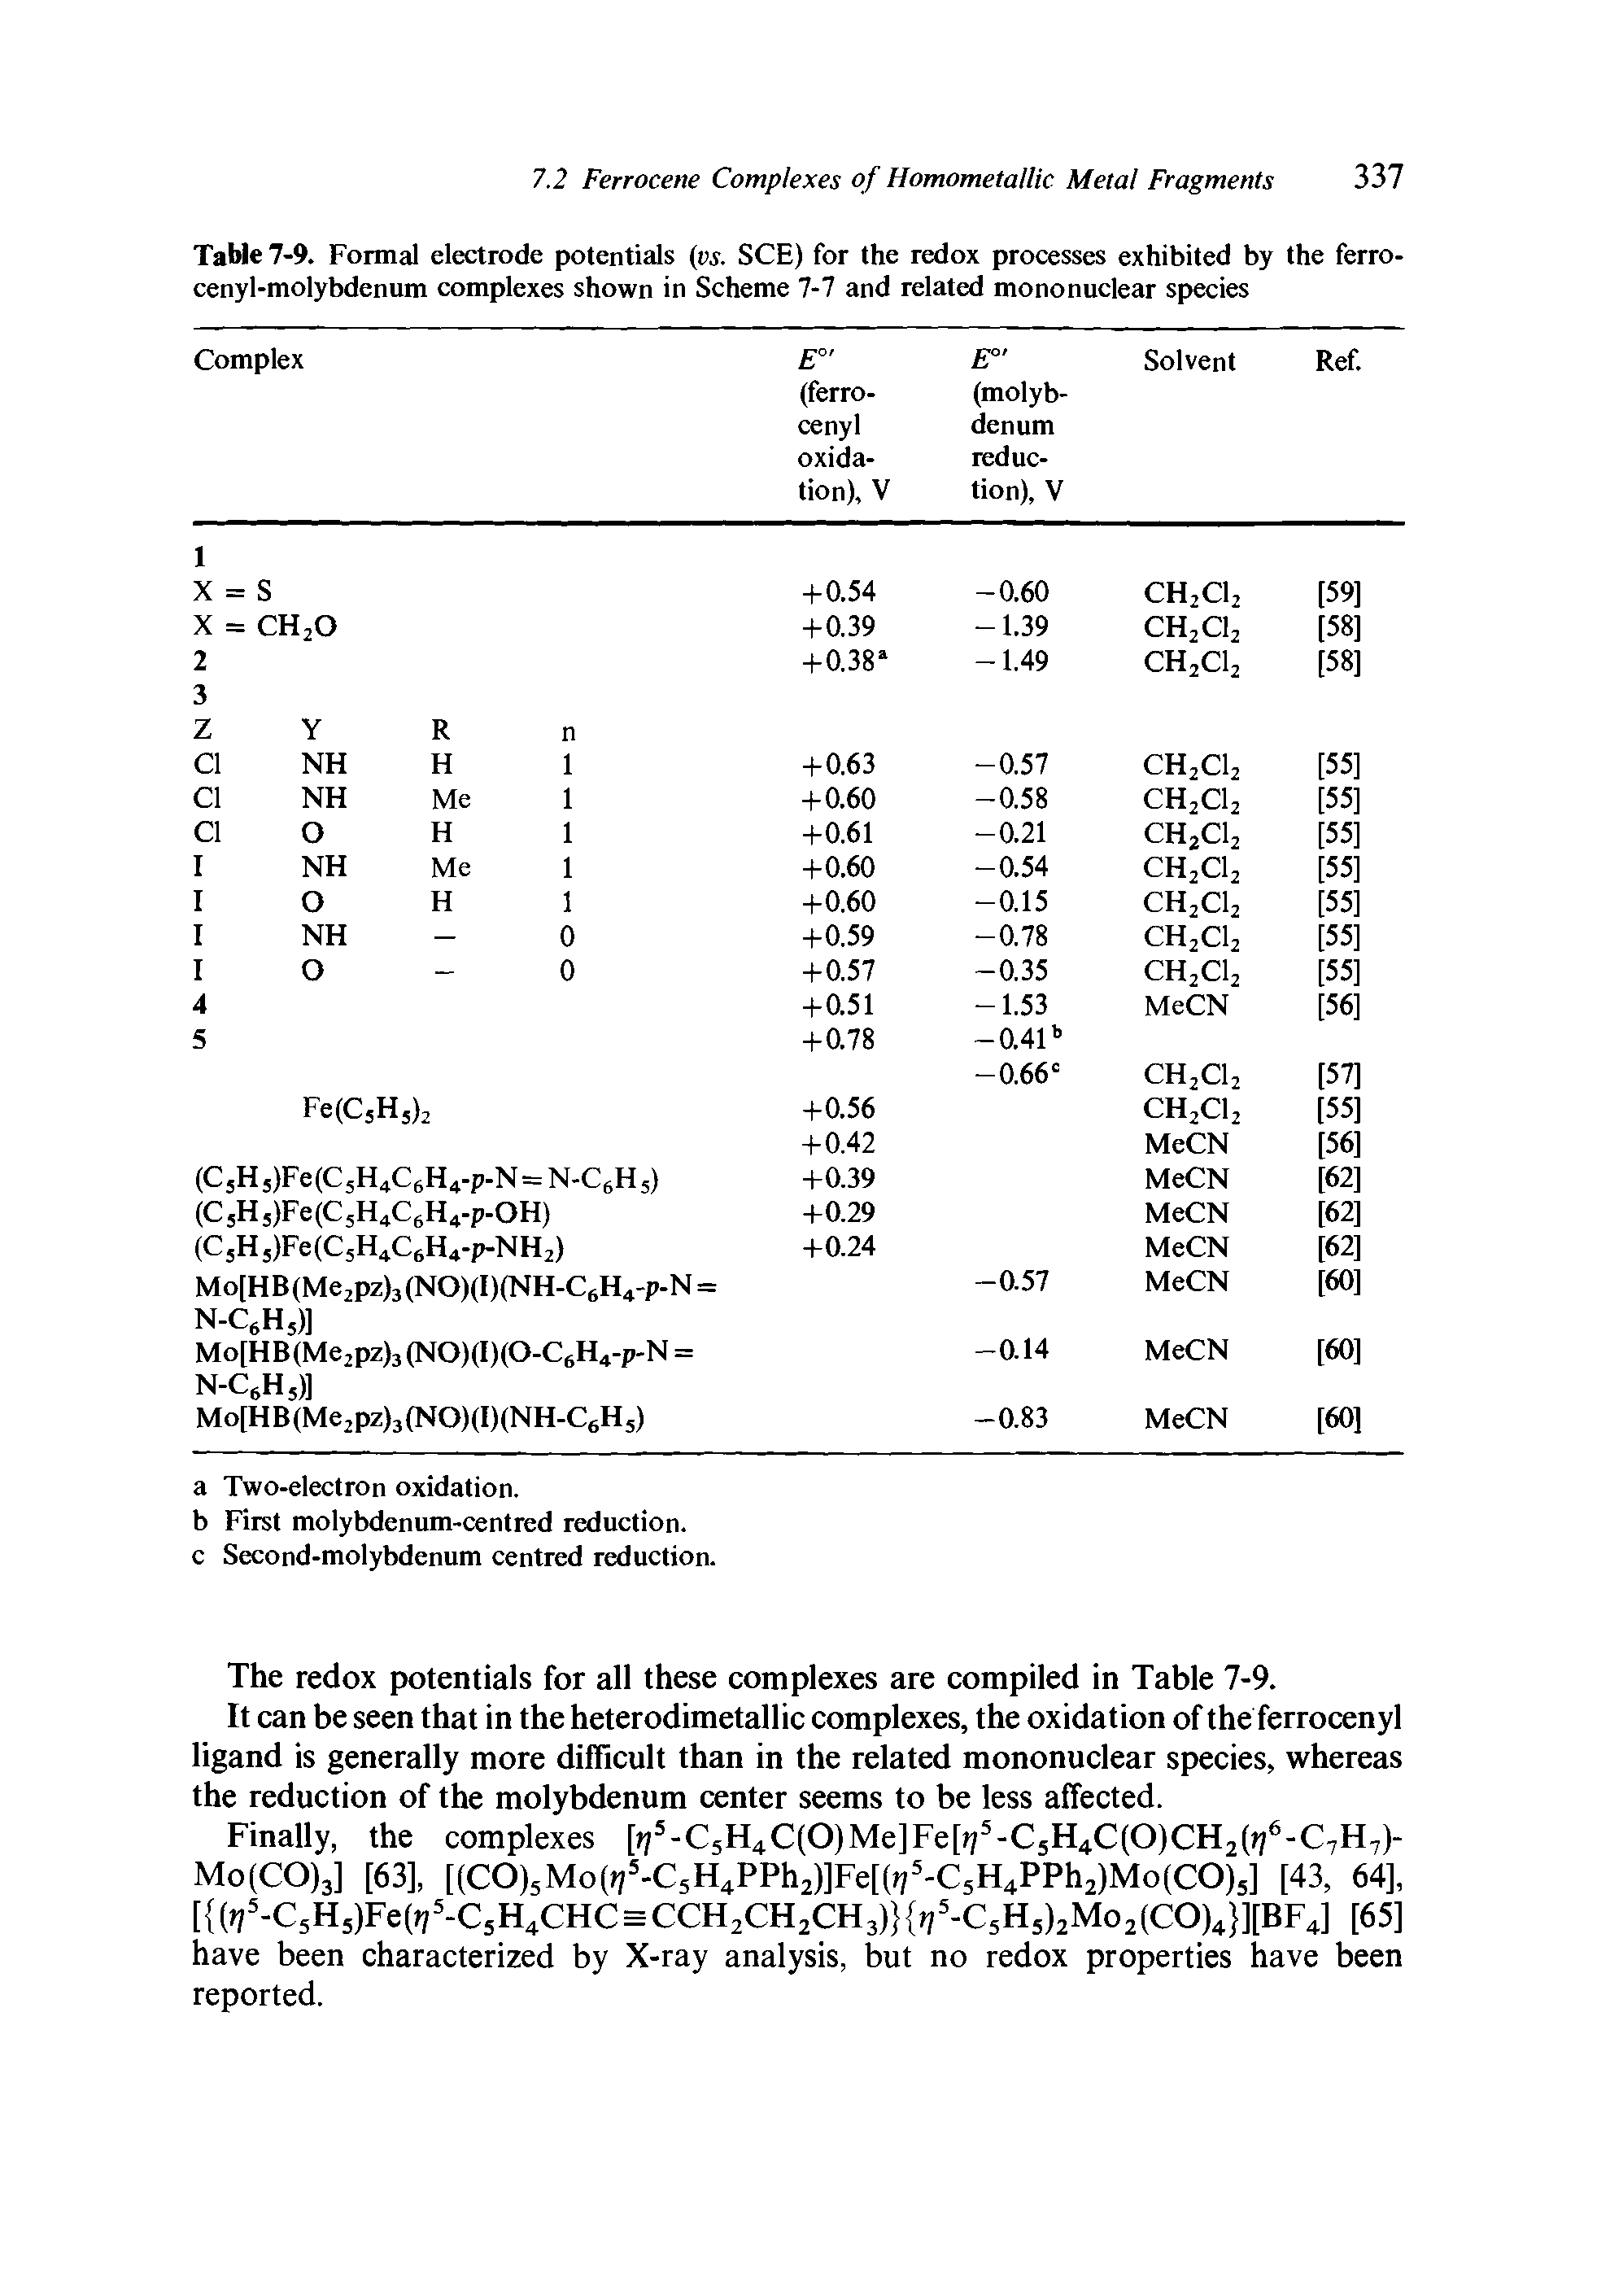 Table 7-9. Formal electrode potentials (vs. SCE) for the redox processes exhibited by the ferro-cenyl-molybdenum complexes shown in Scheme 7-7 and related mononuclear species...